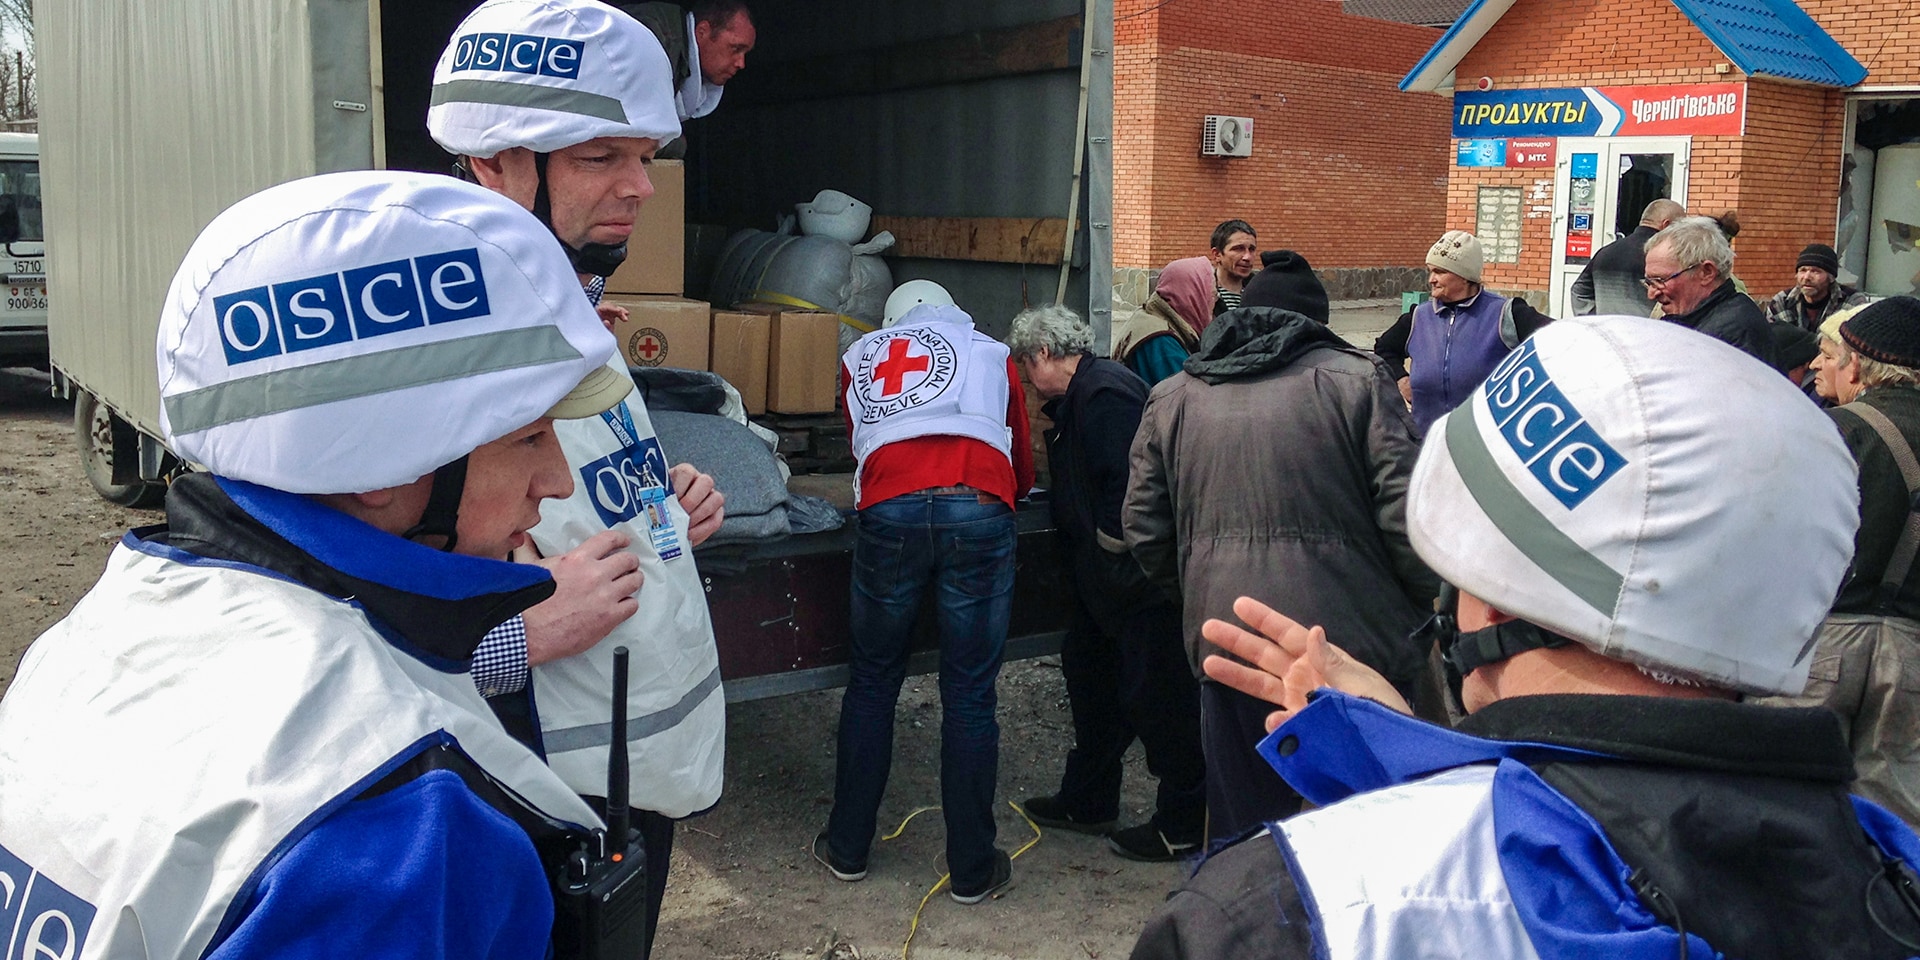  Three members of the OSCE mission observe the delivery of aid packages to the Ukrainian population.